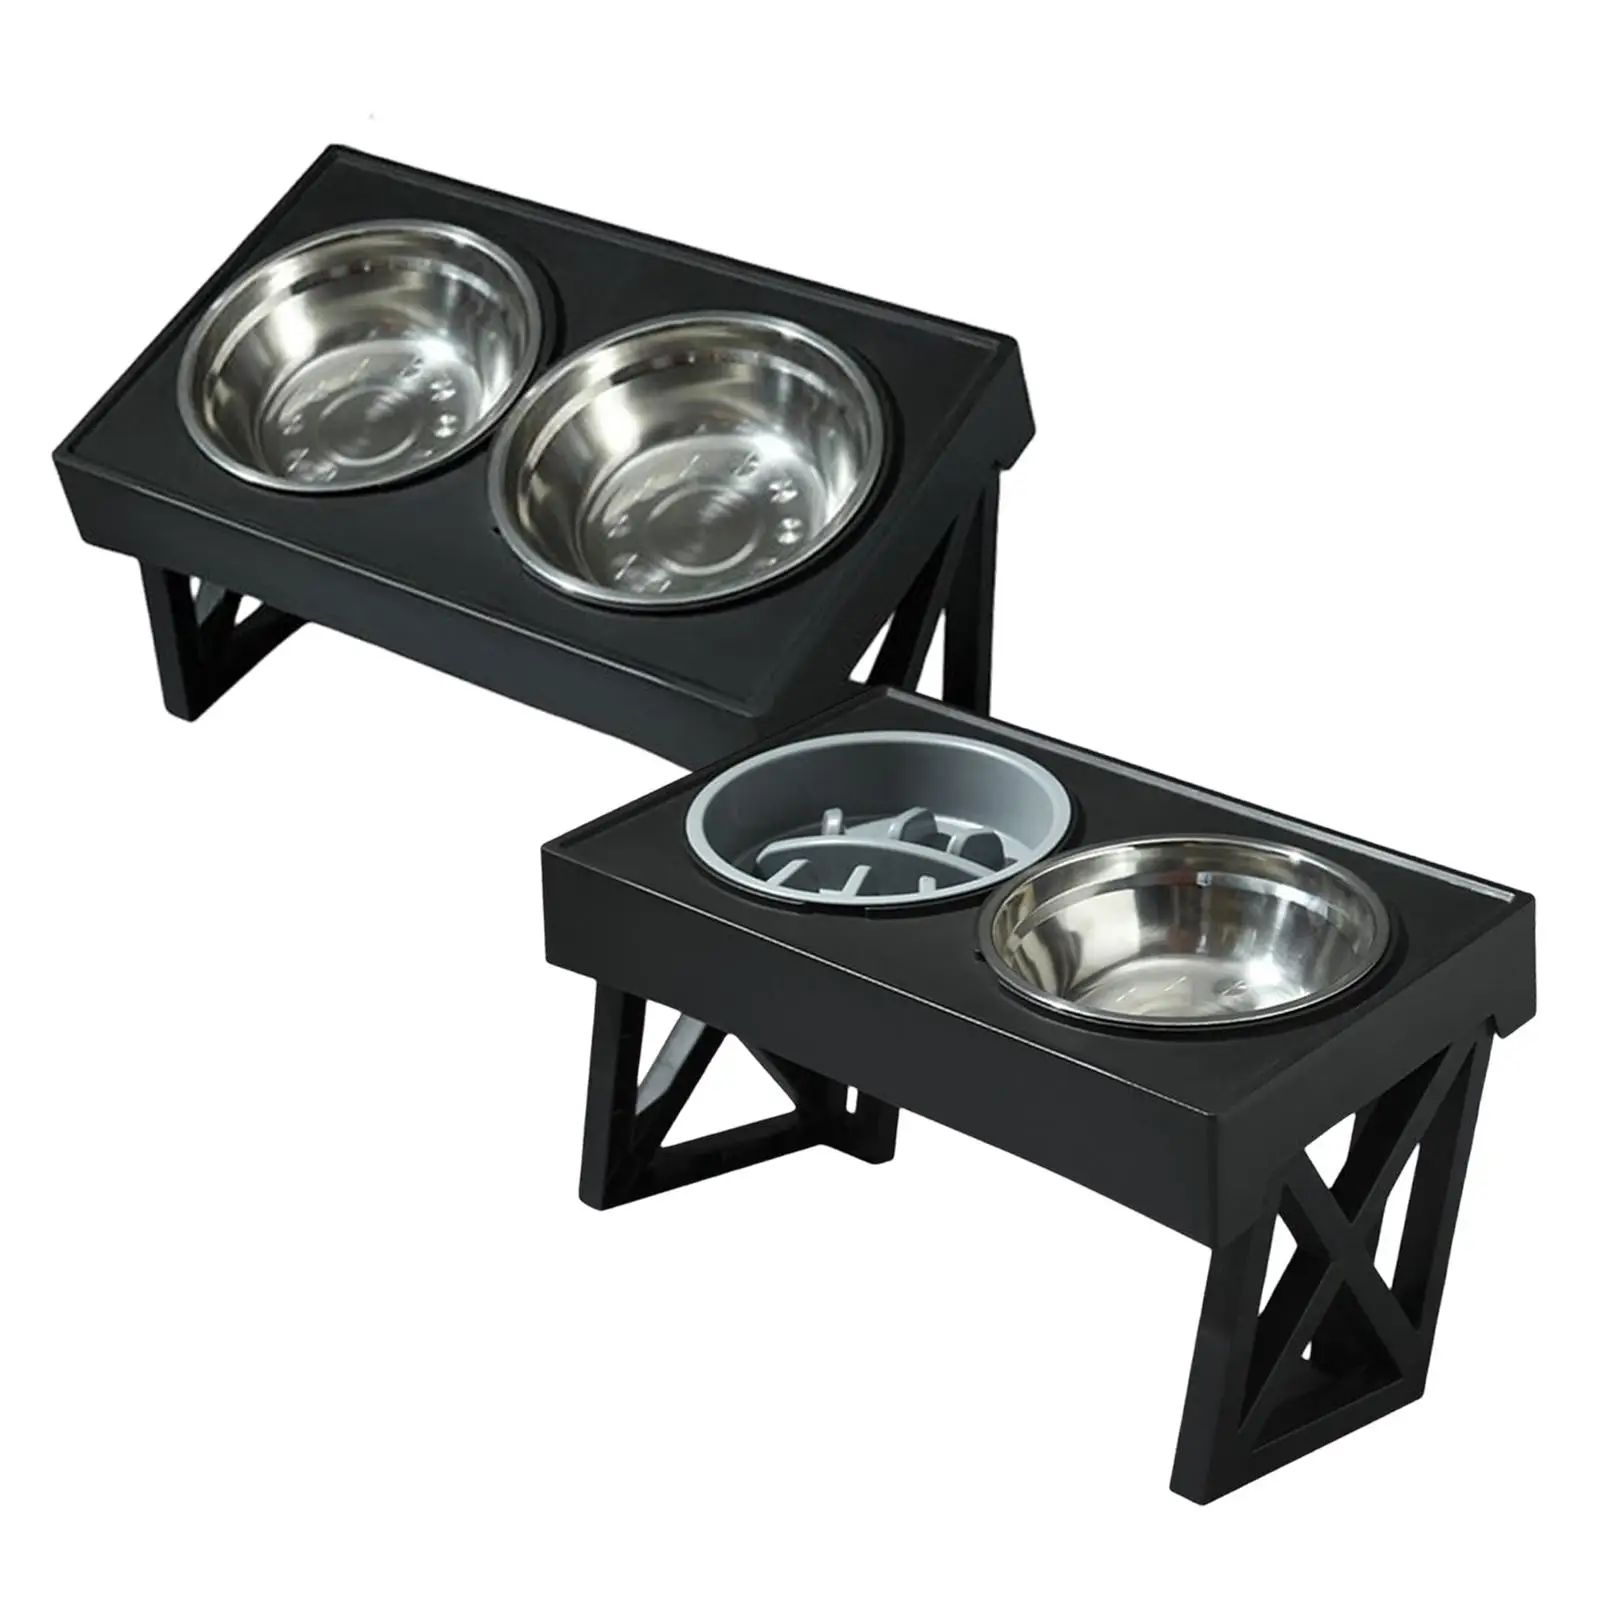 Raised Bowls Stainless Steel Bowl Adjustable Non Slip Dog Bowls Stand for Cats Puppy Small Medium Large Dogs